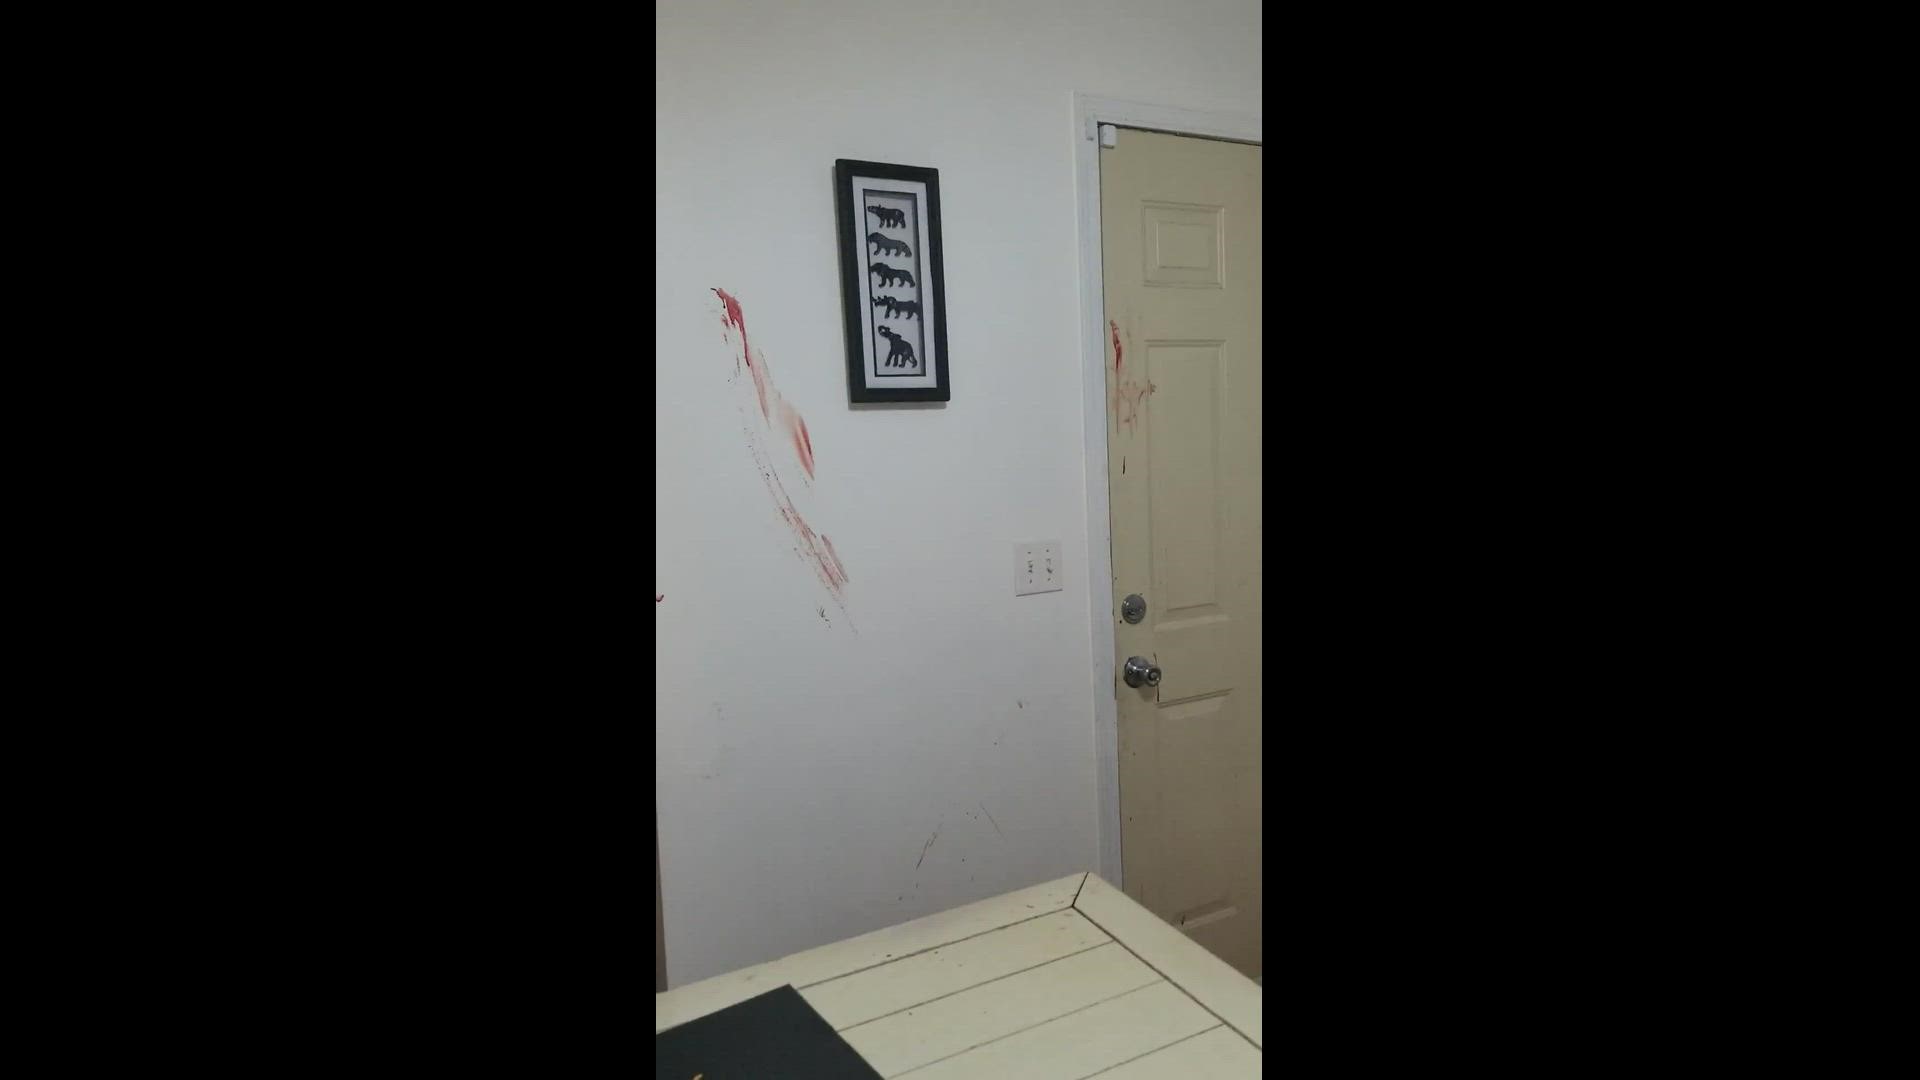 After his north Minneapolis home was broken into, Bryan Plunger took a video of the aftermath.